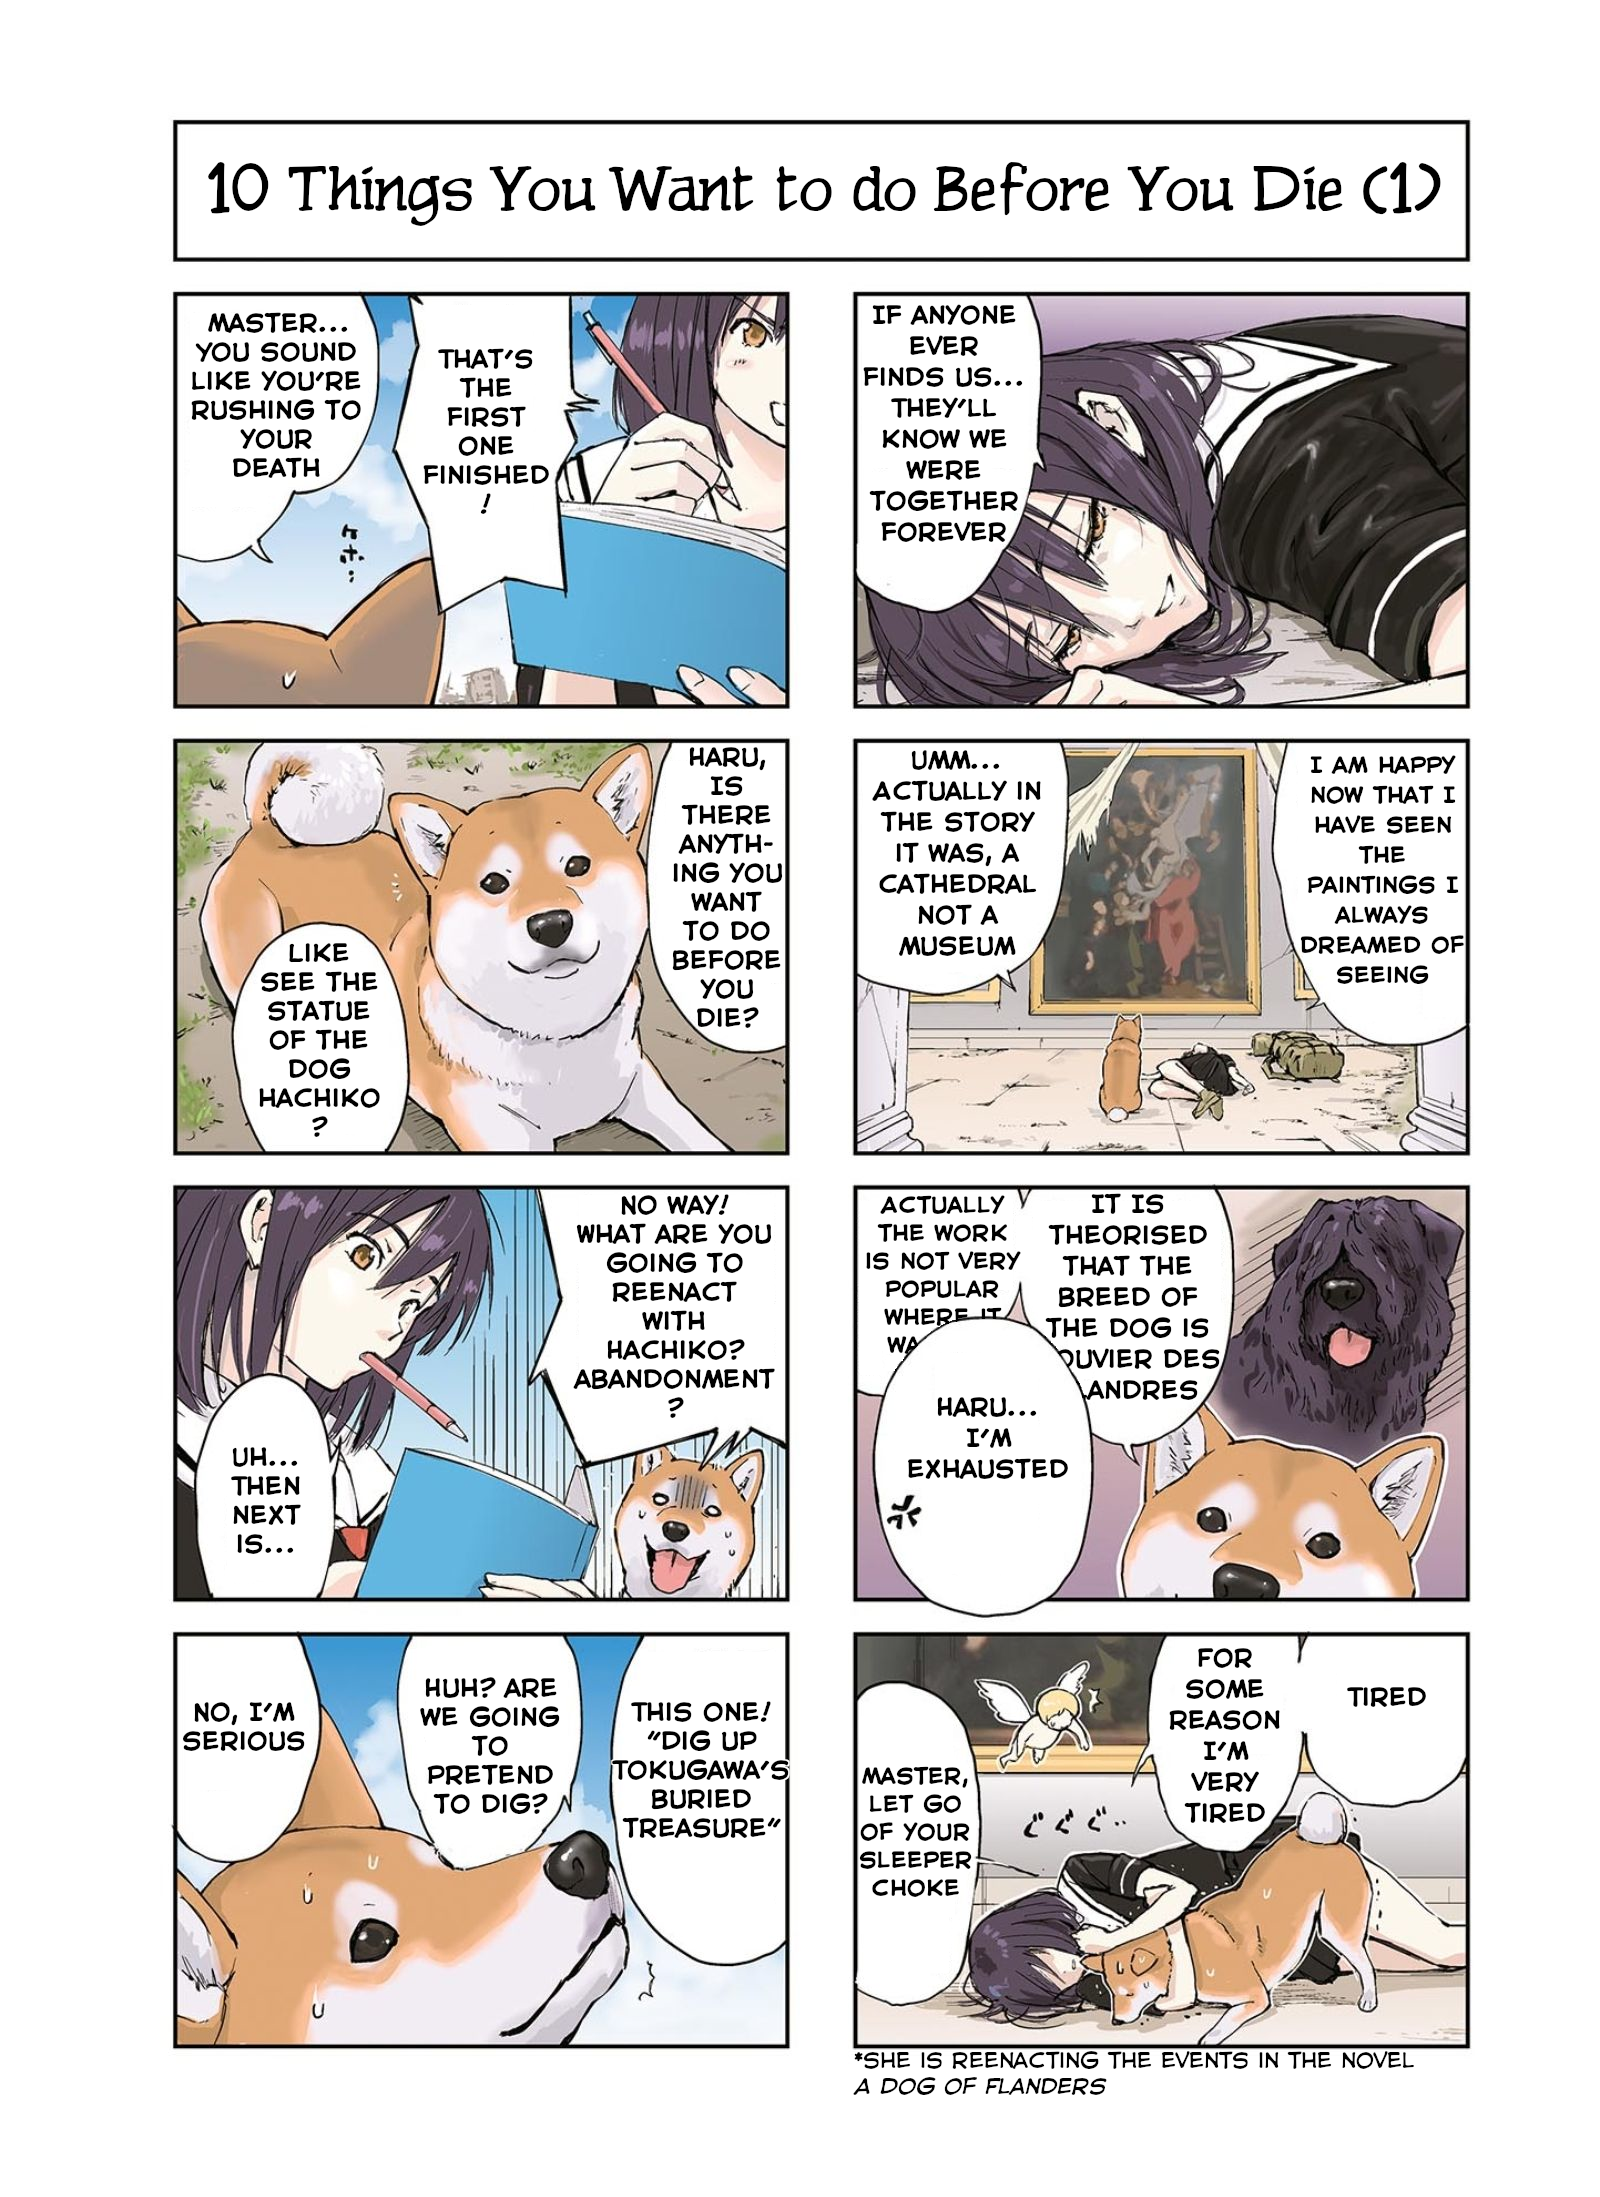 Roaming The Apocalypse With My Shiba Inu - chapter 10 - #5